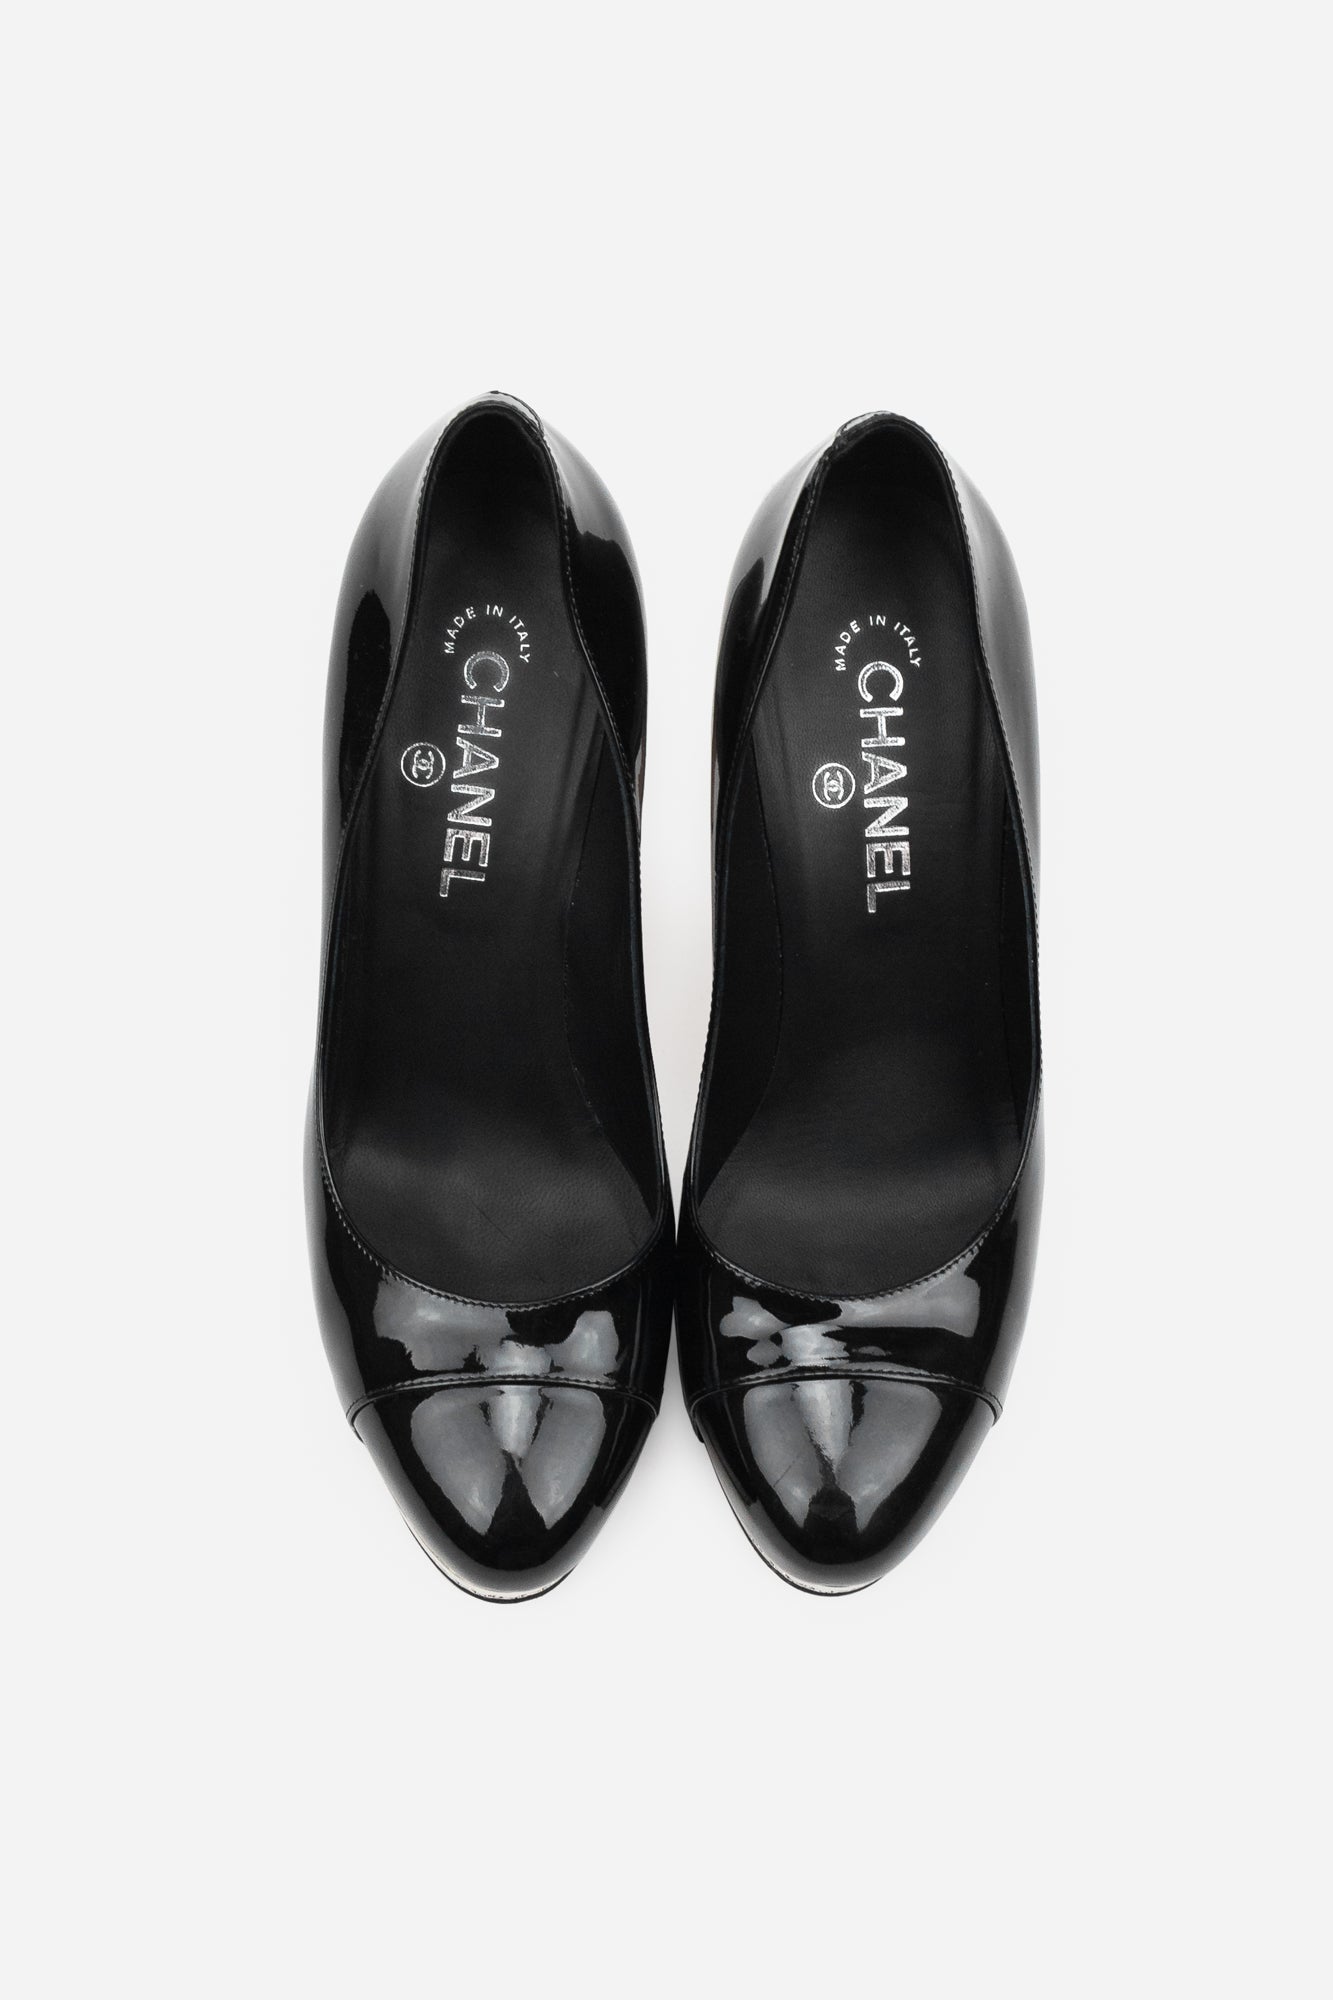 Black Patent Leather Name Plate Pumps